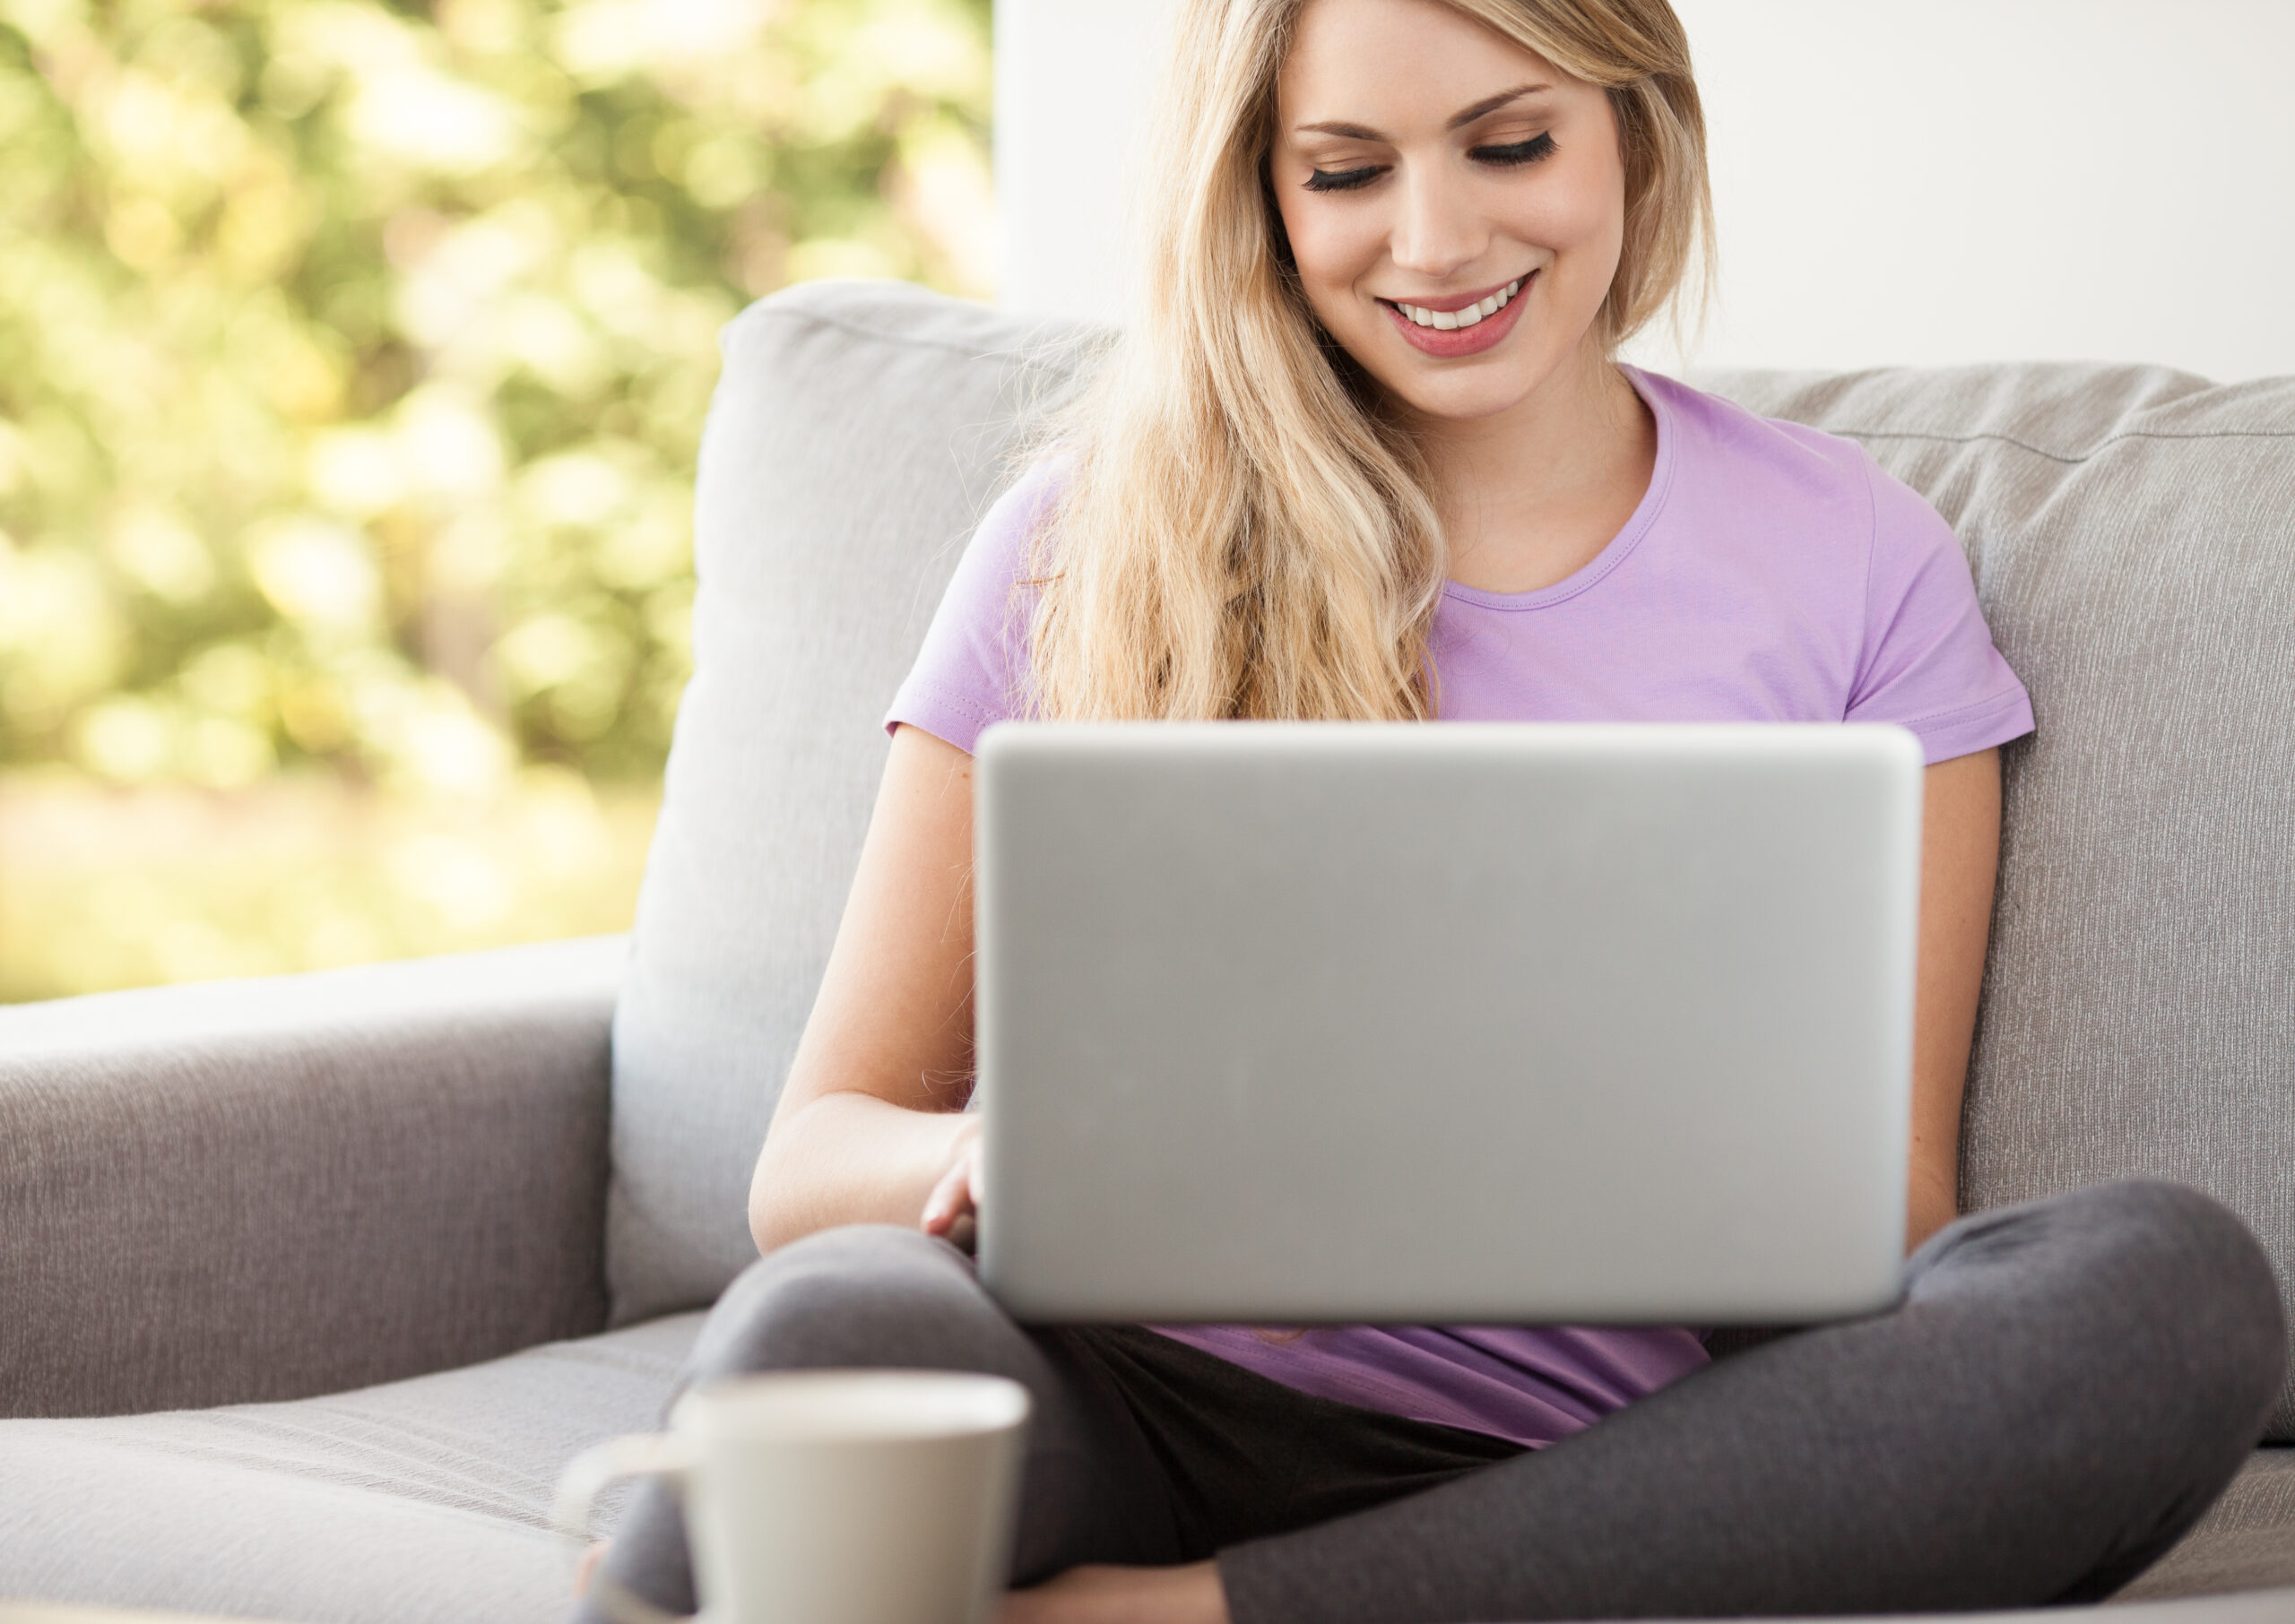 A woman using a laptop on a couch.